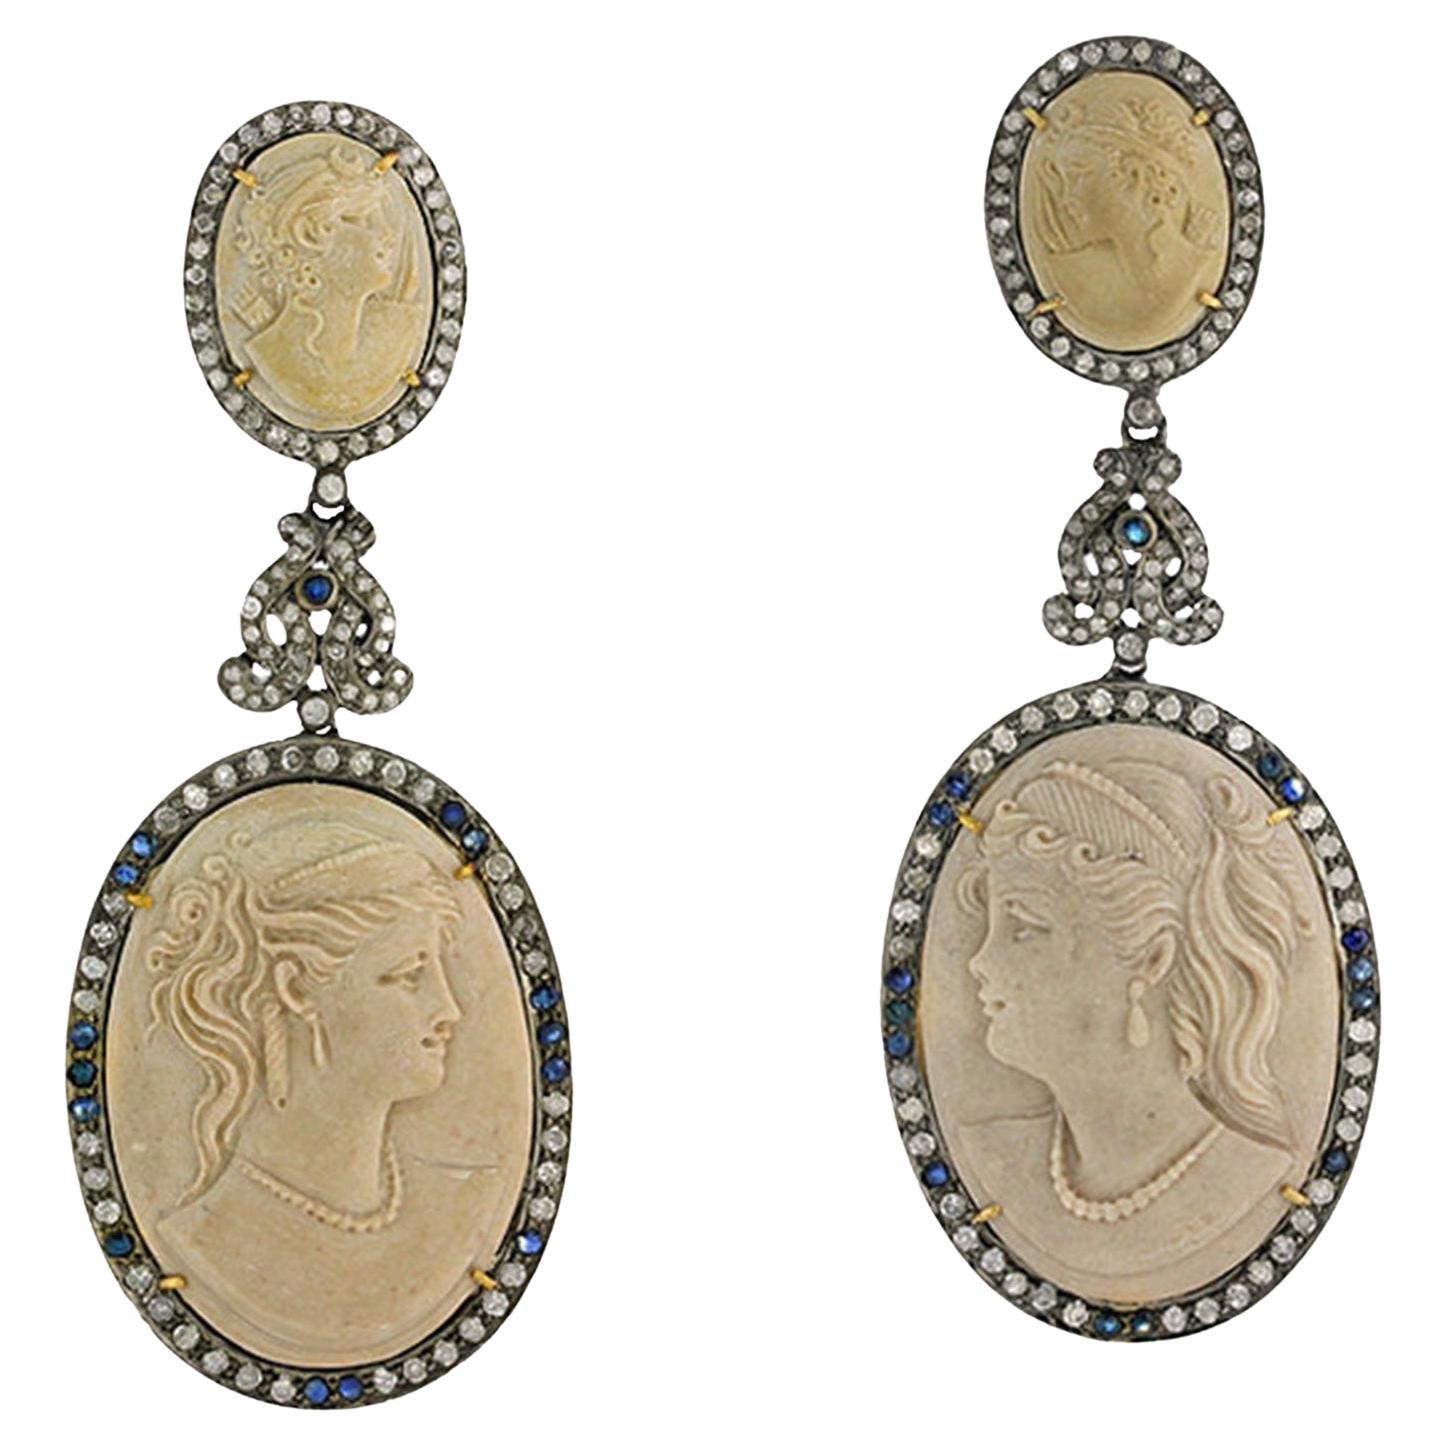 Woman Portrait Shell Cameo Earrings With Sapphires & Diamonds  99.27 Carats For Sale